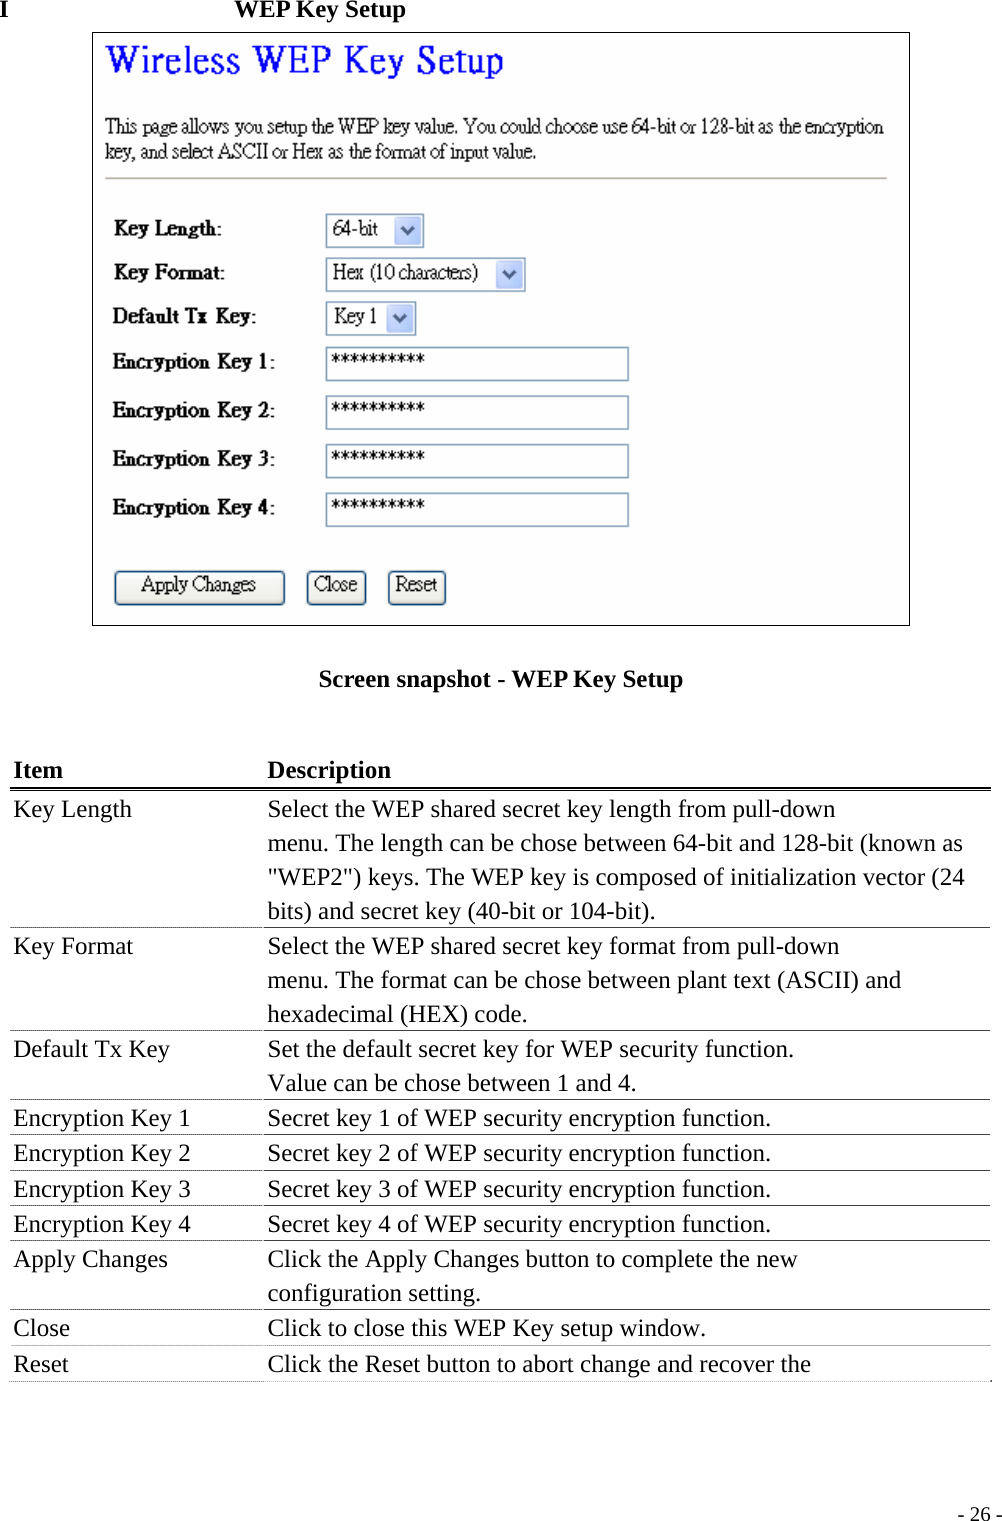 I                  WEP Key Setup  Screen snapshot - WEP Key Setup  Item Description Key Length  Select the WEP shared secret key length from pull-down menu. The length can be chose between 64-bit and 128-bit (known as &quot;WEP2&quot;) keys. The WEP key is composed of initialization vector (24 bits) and secret key (40-bit or 104-bit). Key Format  Select the WEP shared secret key format from pull-down menu. The format can be chose between plant text (ASCII) and hexadecimal (HEX) code. Default Tx Key  Set the default secret key for WEP security function. Value can be chose between 1 and 4. Encryption Key 1  Secret key 1 of WEP security encryption function. Encryption Key 2  Secret key 2 of WEP security encryption function. Encryption Key 3  Secret key 3 of WEP security encryption function. Encryption Key 4  Secret key 4 of WEP security encryption function. Apply Changes  Click the Apply Changes button to complete the new configuration setting. Close  Click to close this WEP Key setup window. Reset  Click the Reset button to abort change and recover the  - 26 -